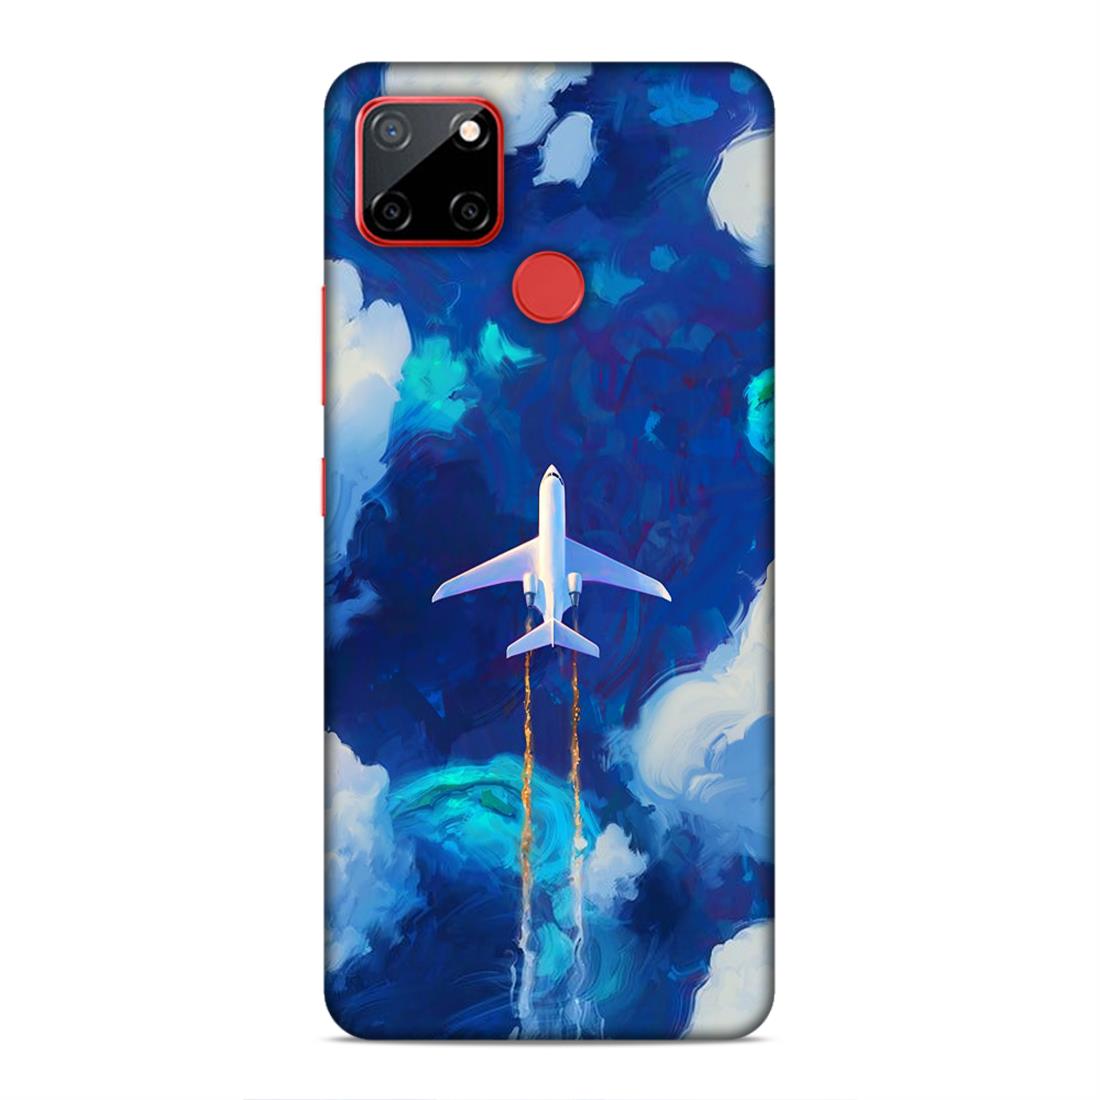 Aeroplane In The Sky Hard Back Case For Realme C12 / C25 / C25s / Narzo 20 / 30A